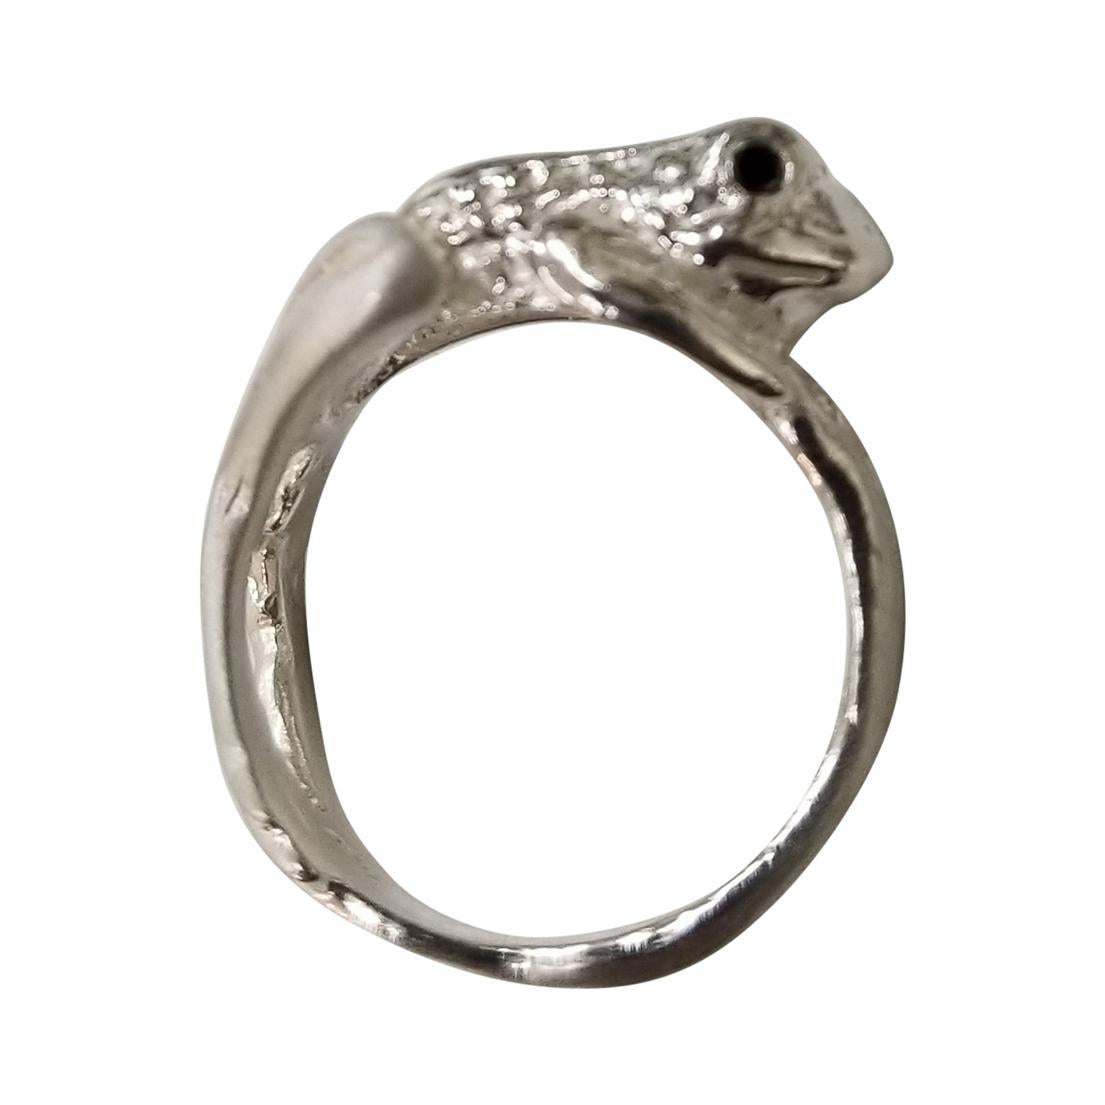 Sterling Silver "Frog" Ring with a Black Diamond Eyes